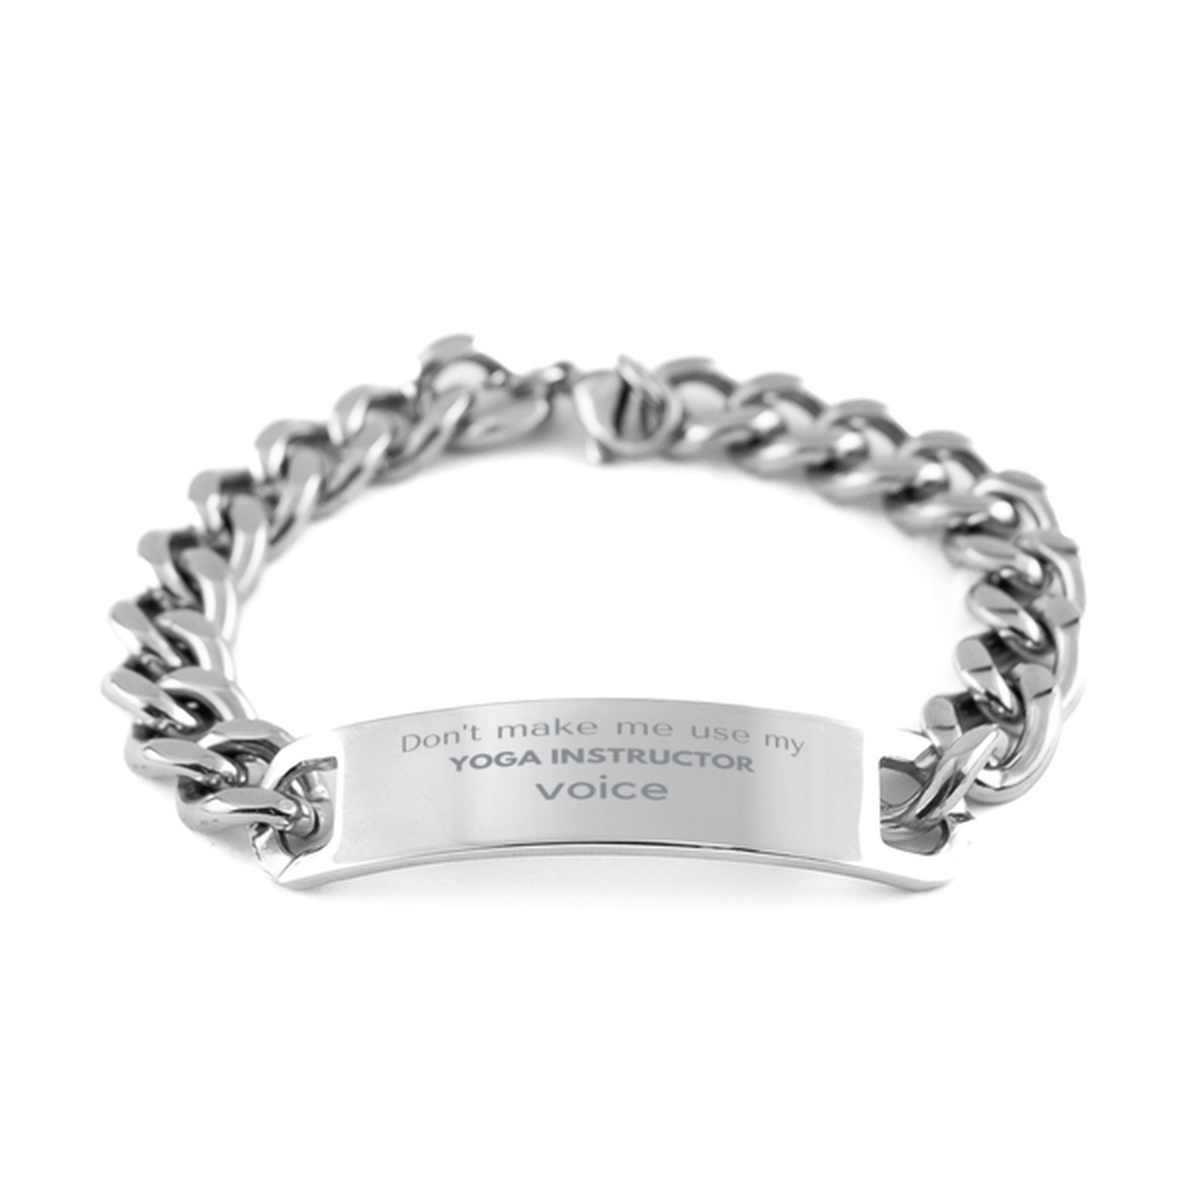 Don't make me use my Yoga Instructor voice, Sarcasm Yoga Instructor Gifts, Christmas Yoga Instructor Cuban Chain Stainless Steel Bracelet Birthday Unique Gifts For Yoga Instructor Coworkers, Men, Women, Colleague, Friends